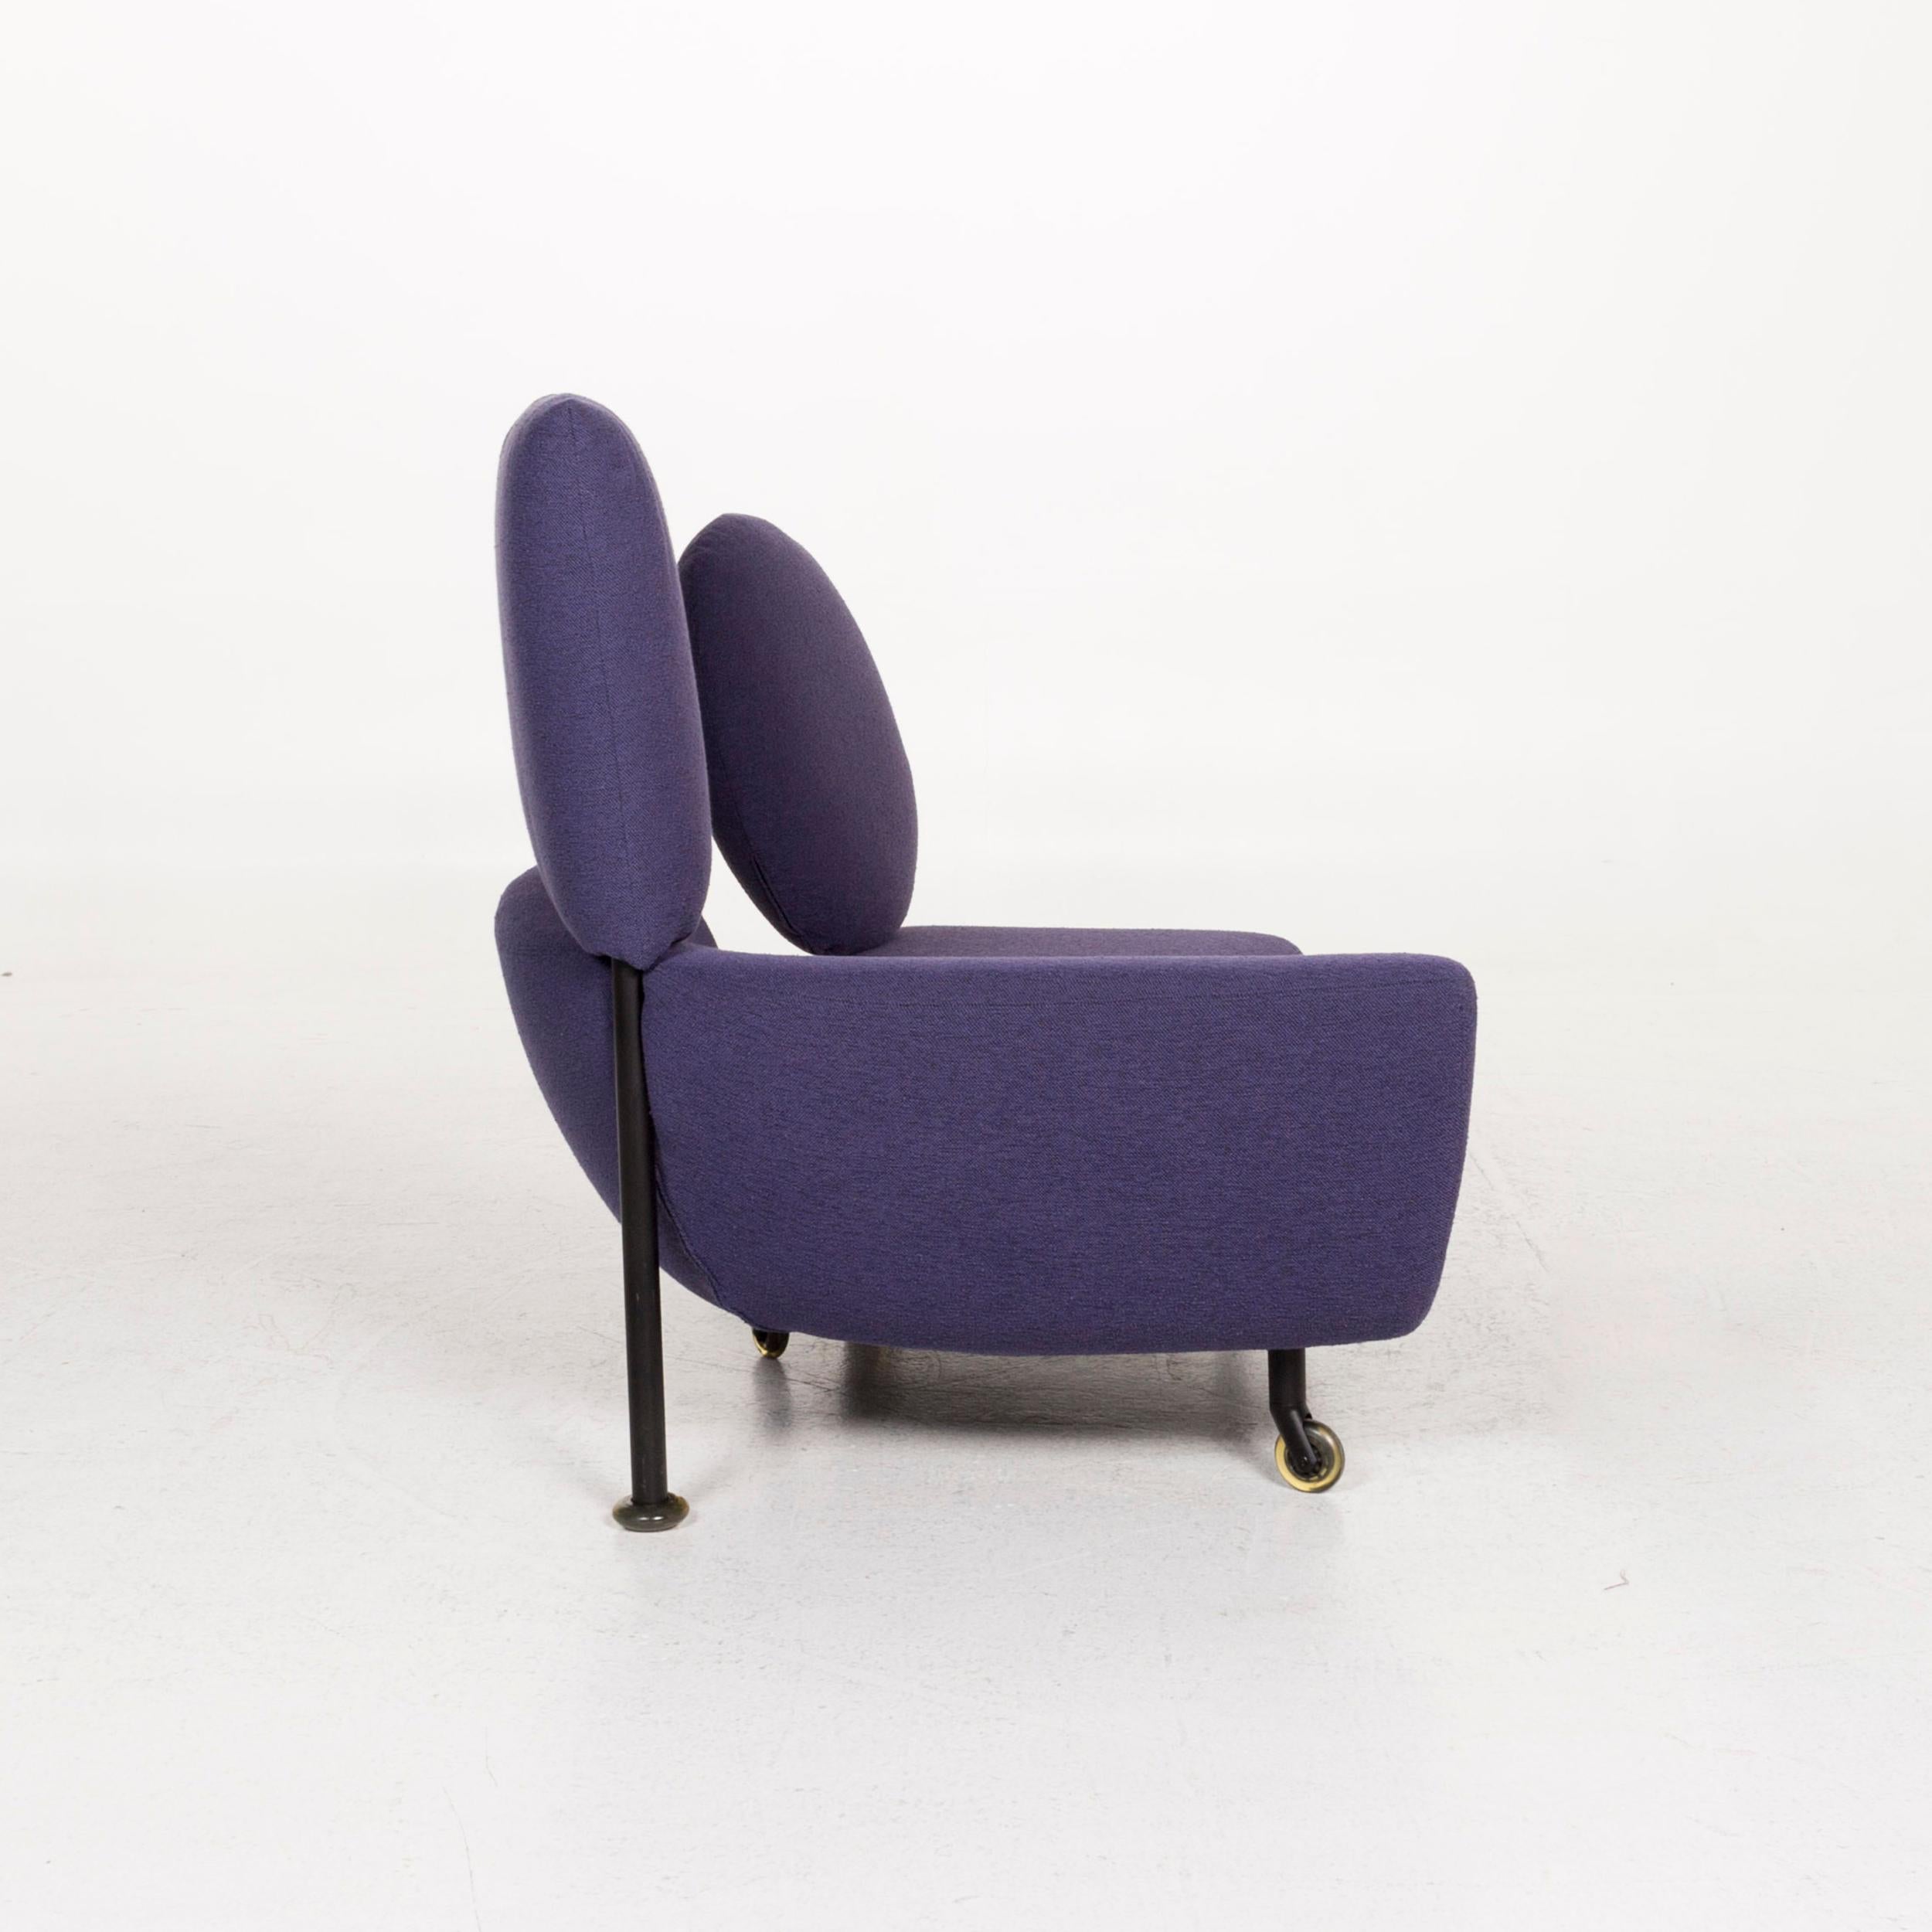 Contemporary Cassina 290 TopKapi Fabric Sofa Violet Two-Seat Function Relax Function Couch